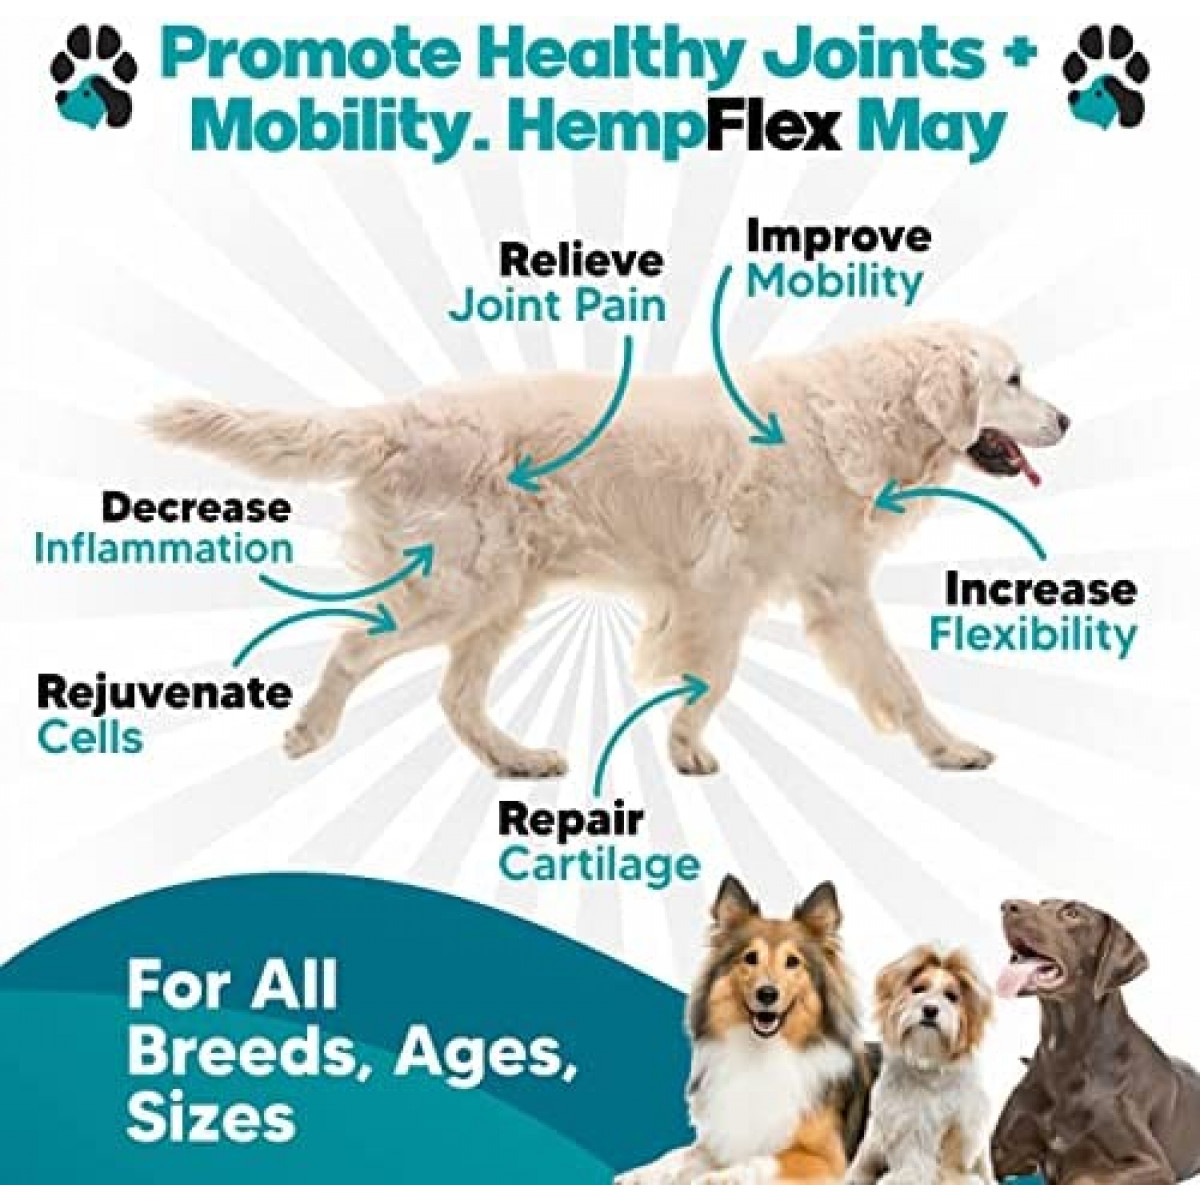 HempFlex - Glucosamine Chondroitin for Dogs - Hemp Oil for Dogs - Safe,  All-Natural Dog Joint Supplement - 120 Mobility Hemp Dog Treats - Hip &  Joint